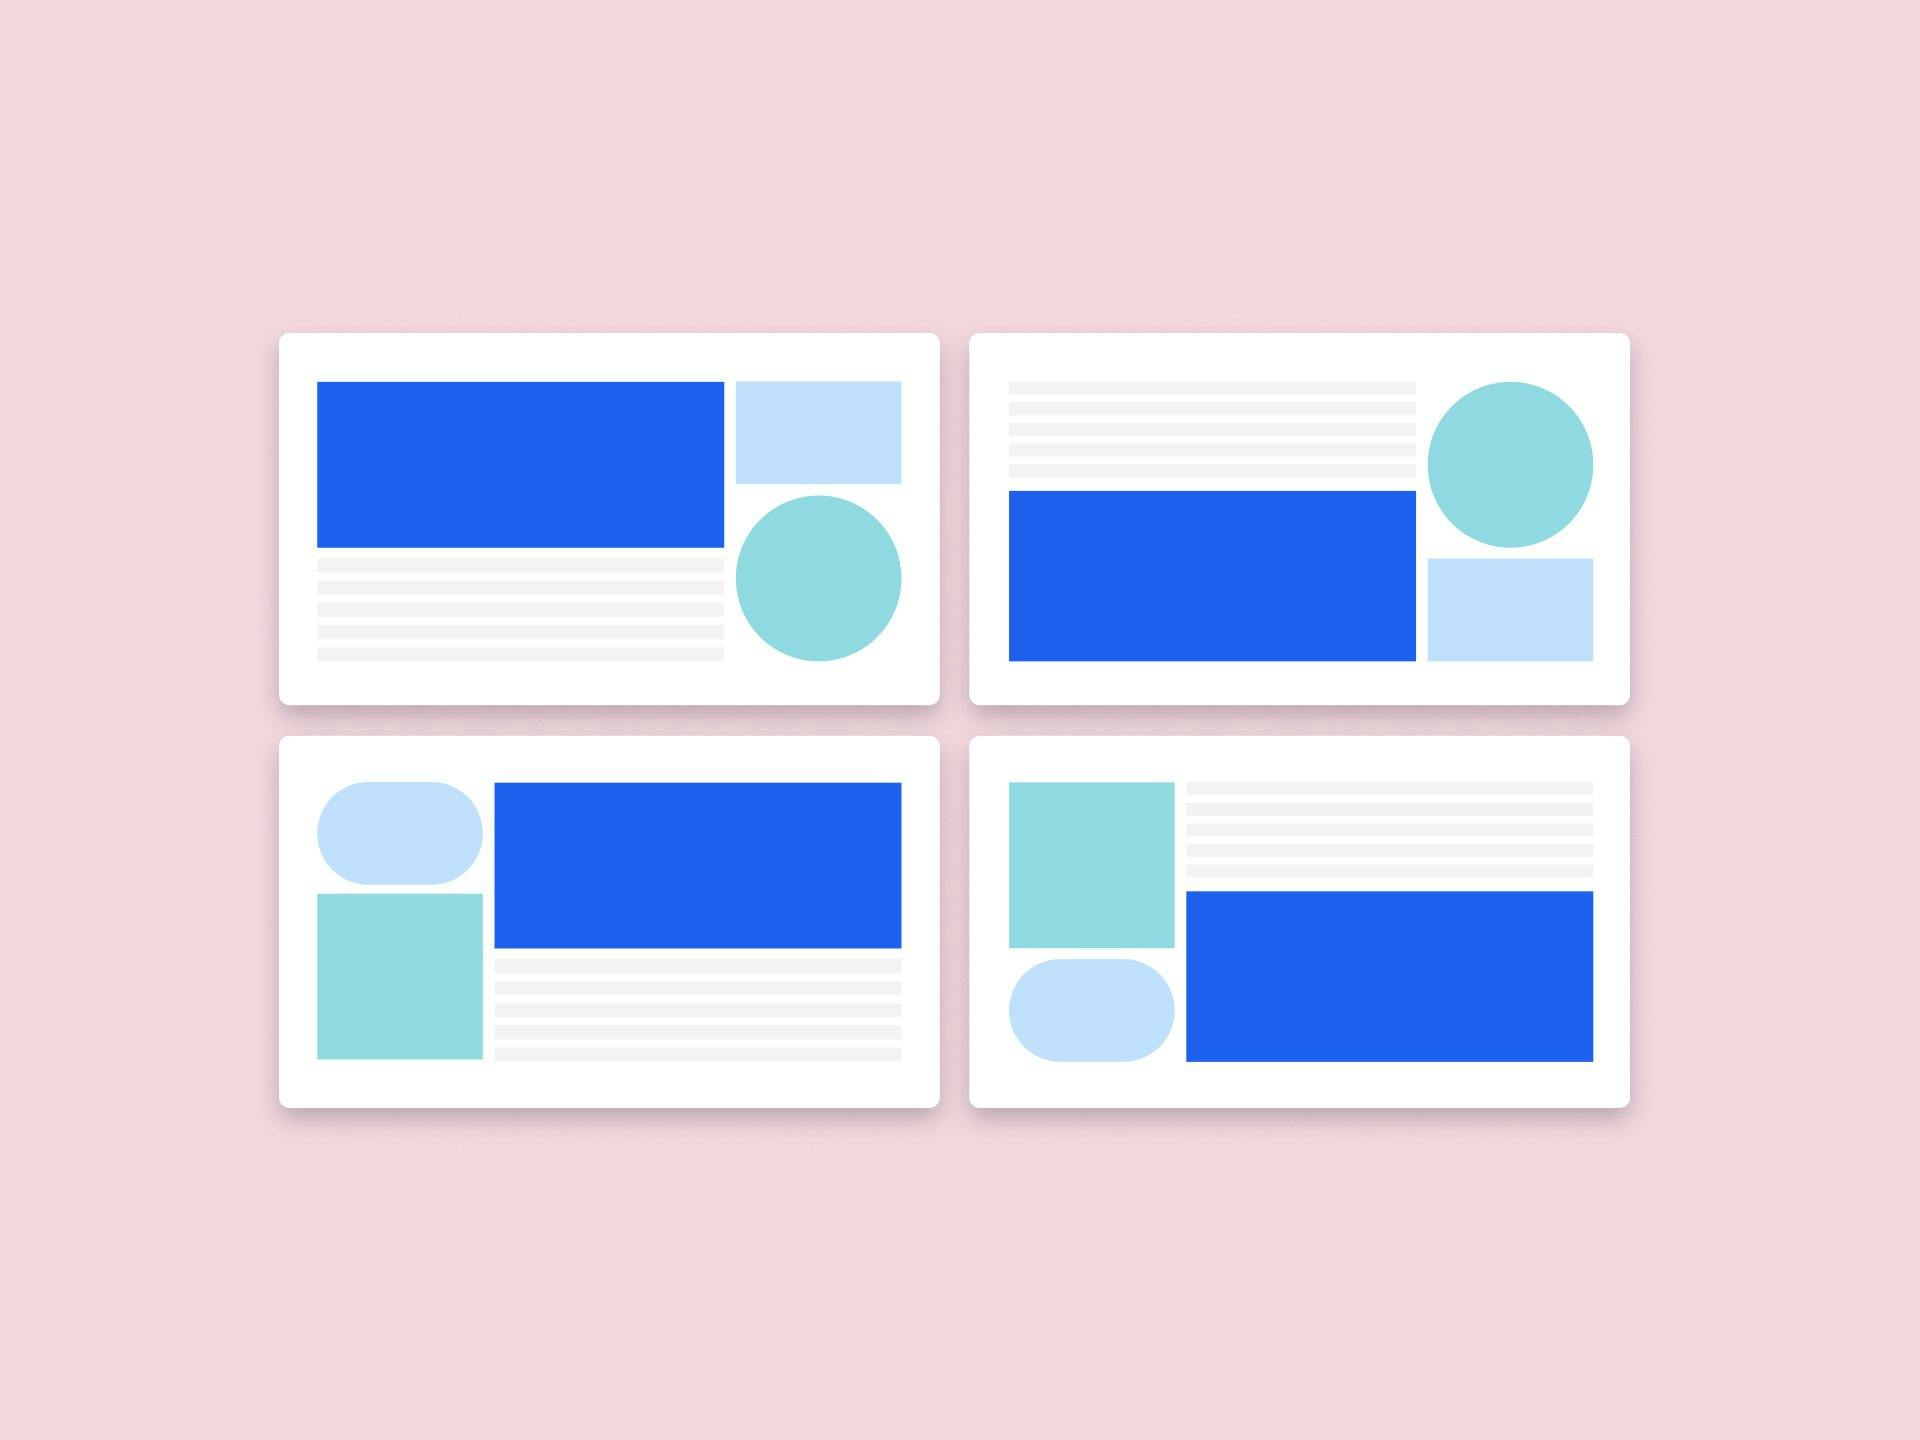 User experience layouts